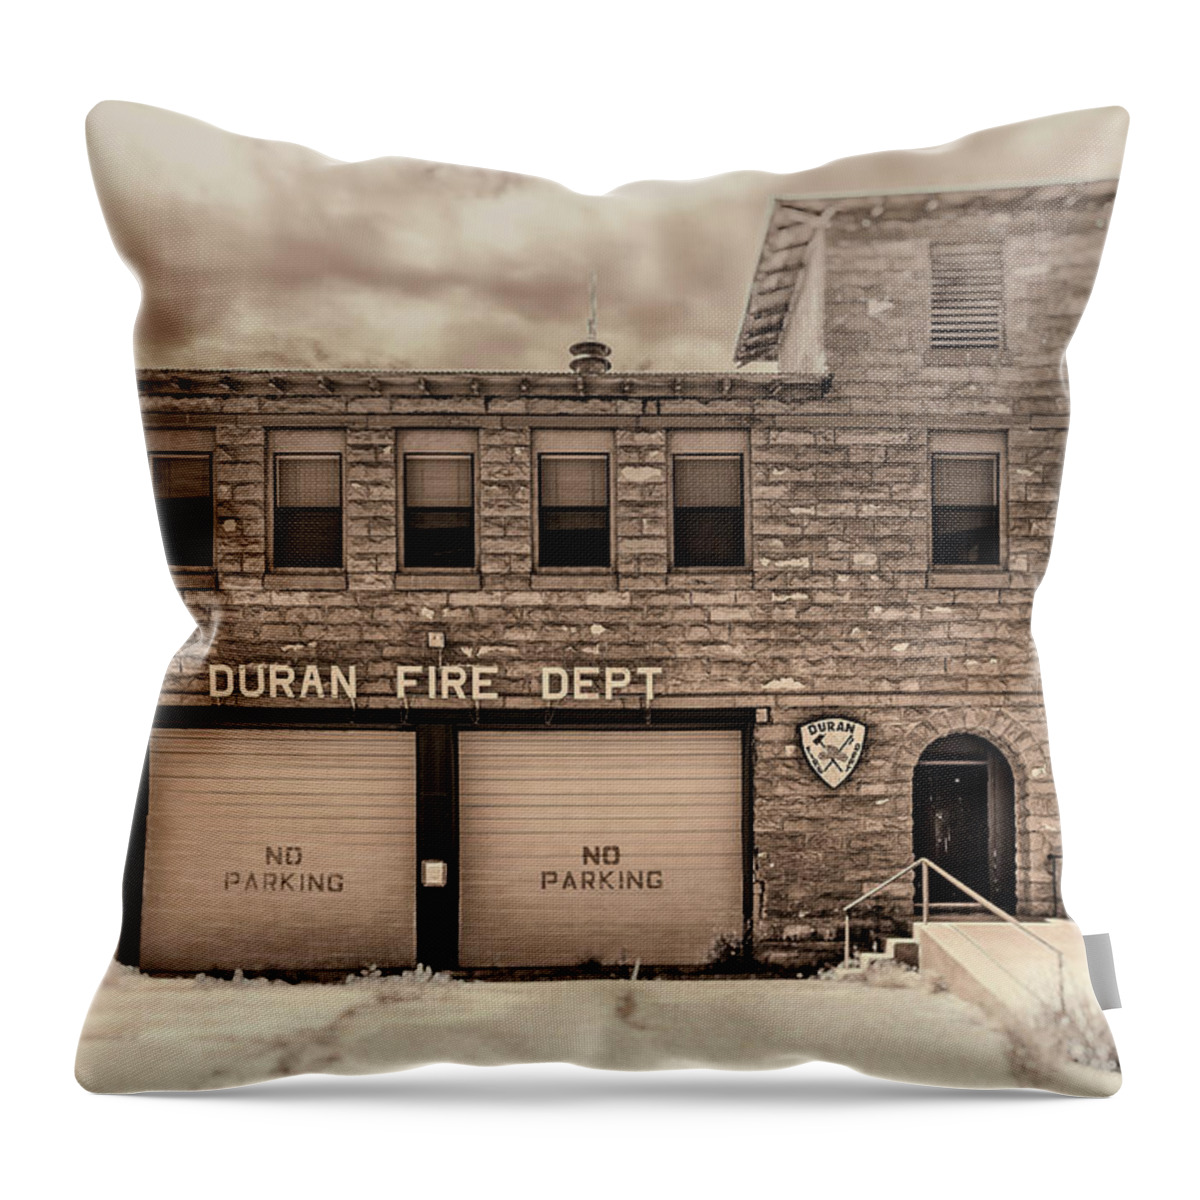  Throw Pillow featuring the photograph Duran Fire Dept by Lou Novick